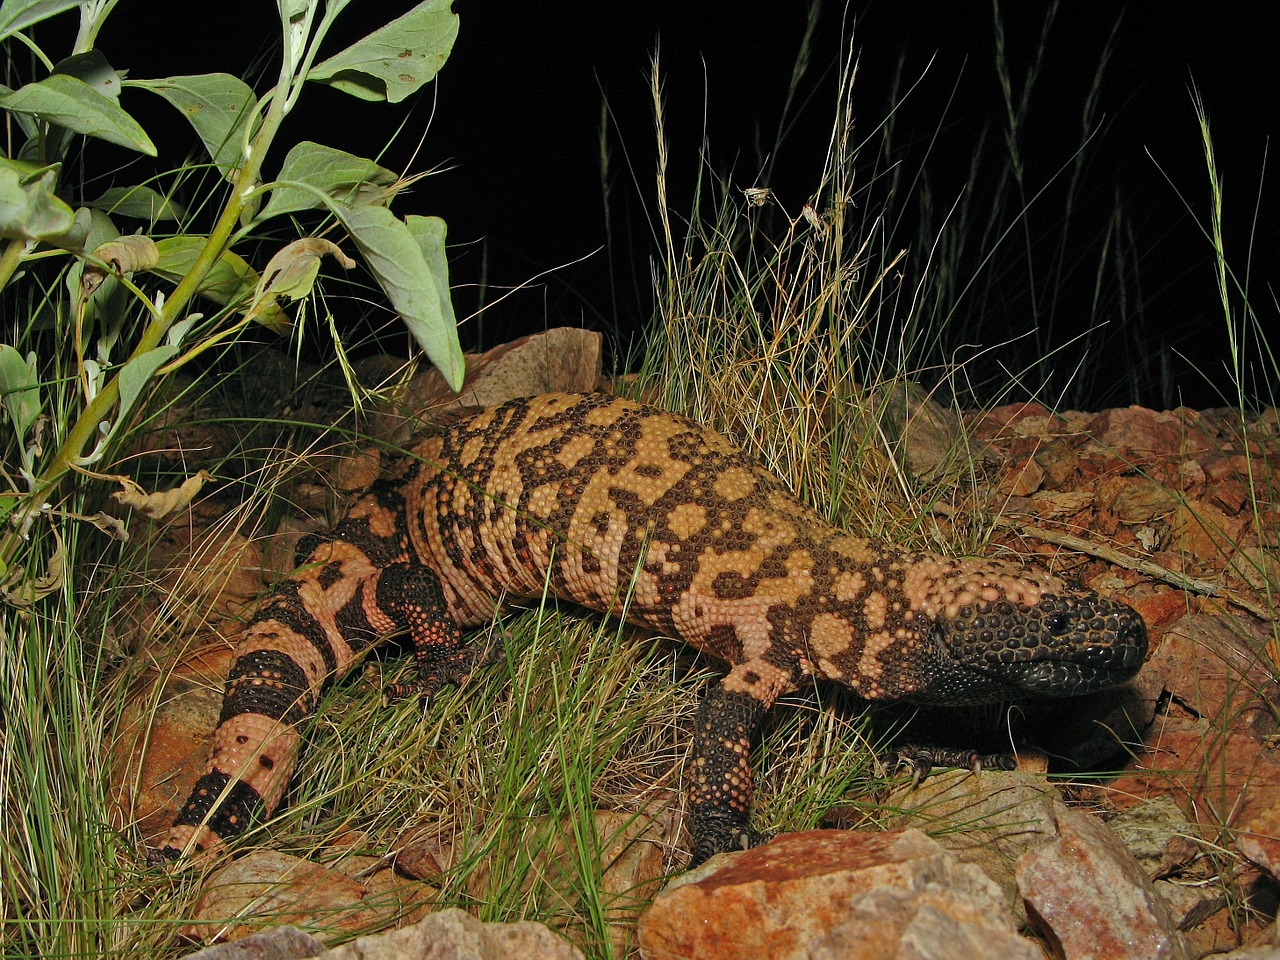 Gila monster facts,reptiles and amphibians, Gila Monster